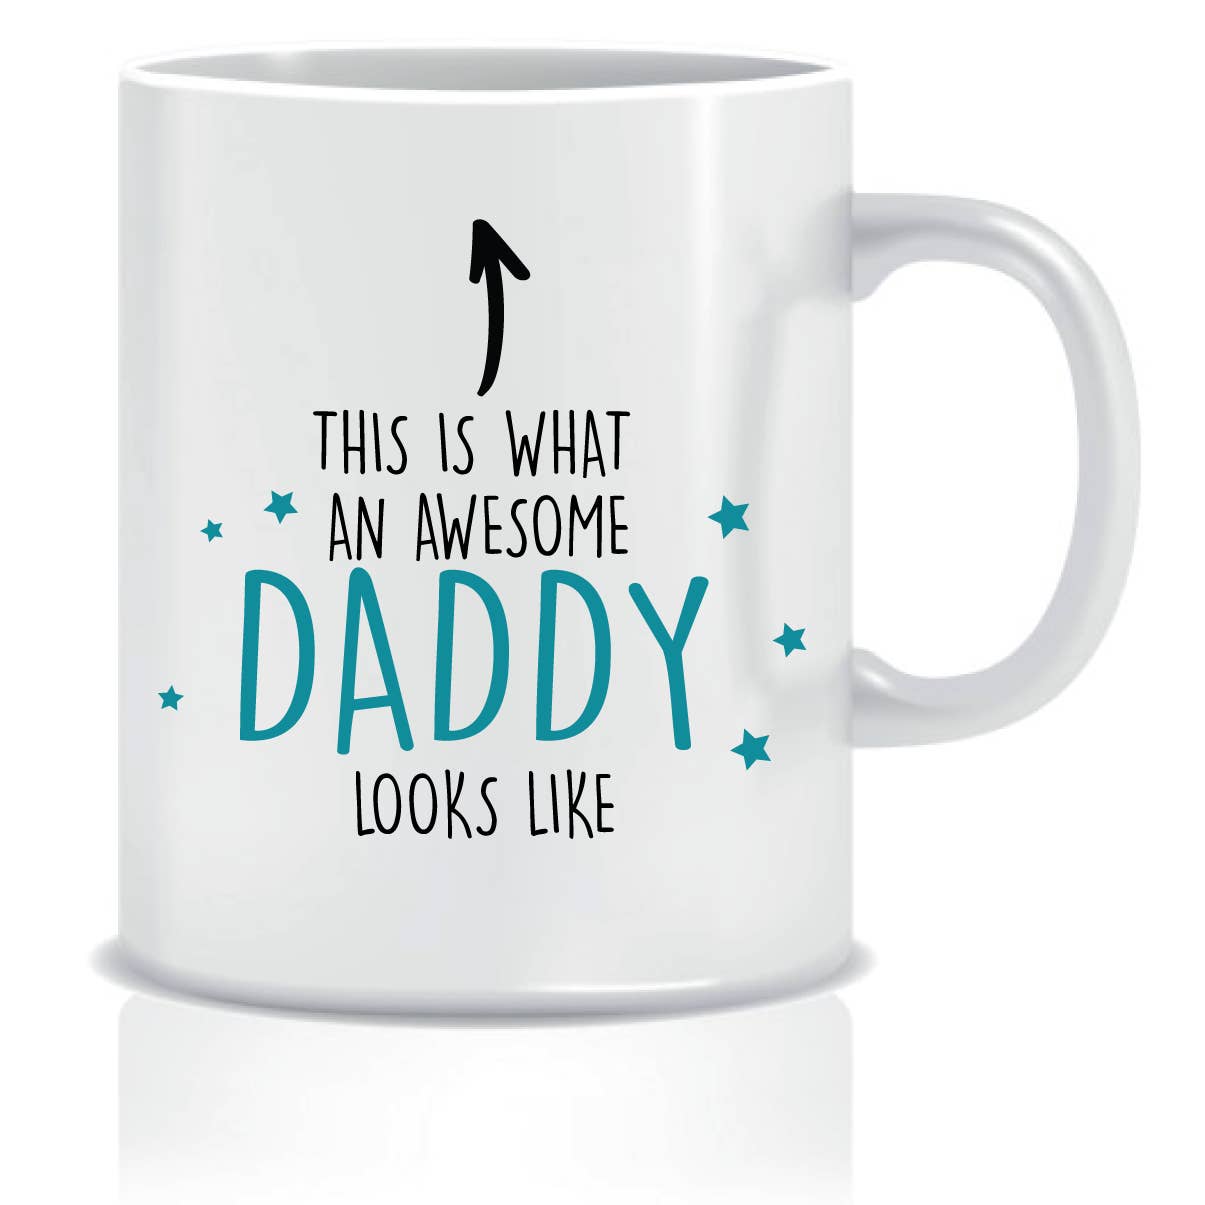 This Is What An Awesome Daddy Looks Like Mug